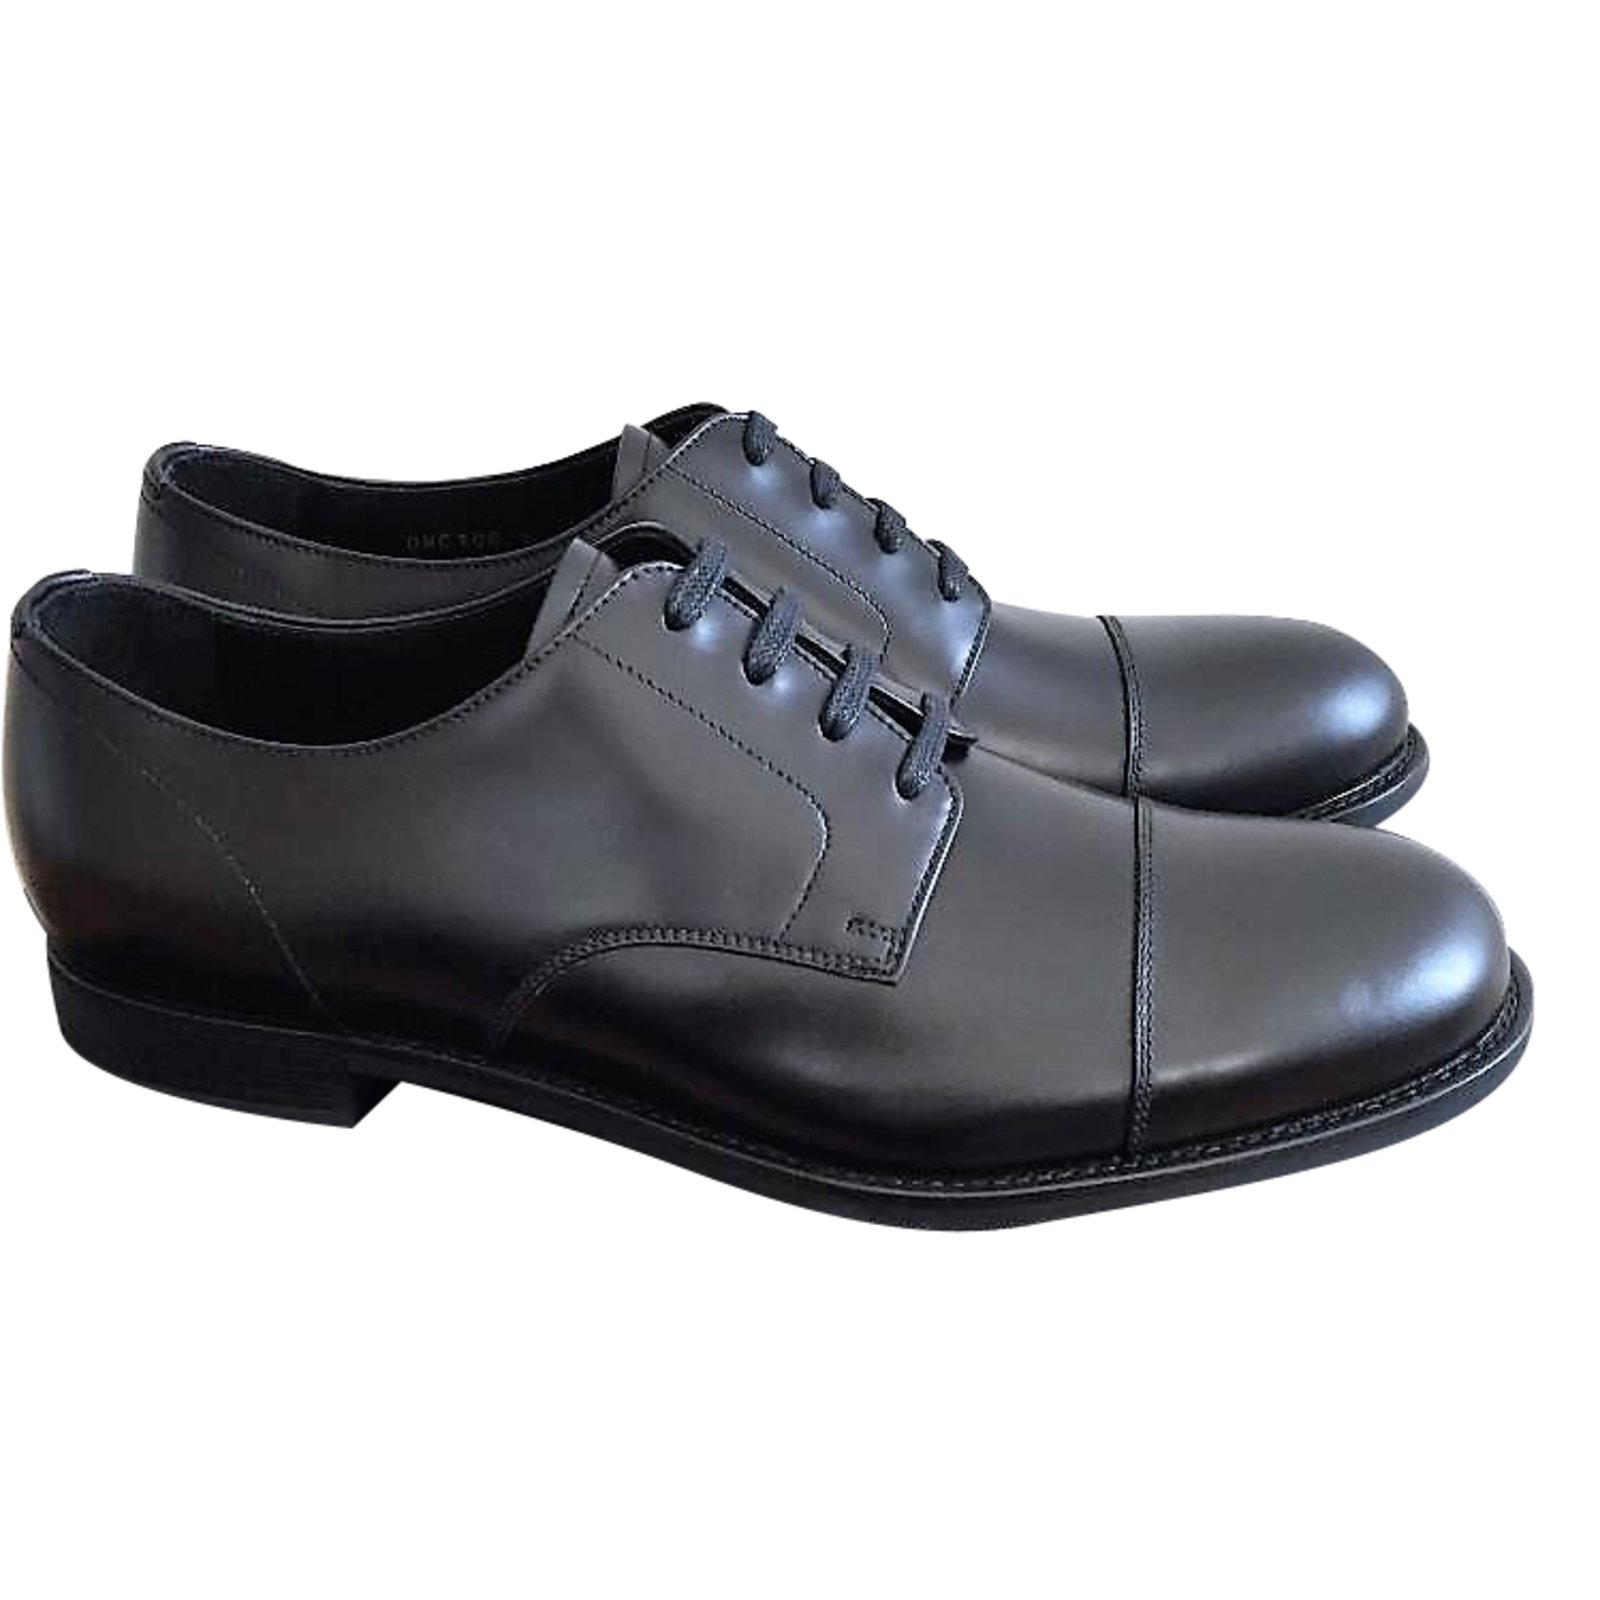 shoes Lace ups Leather 